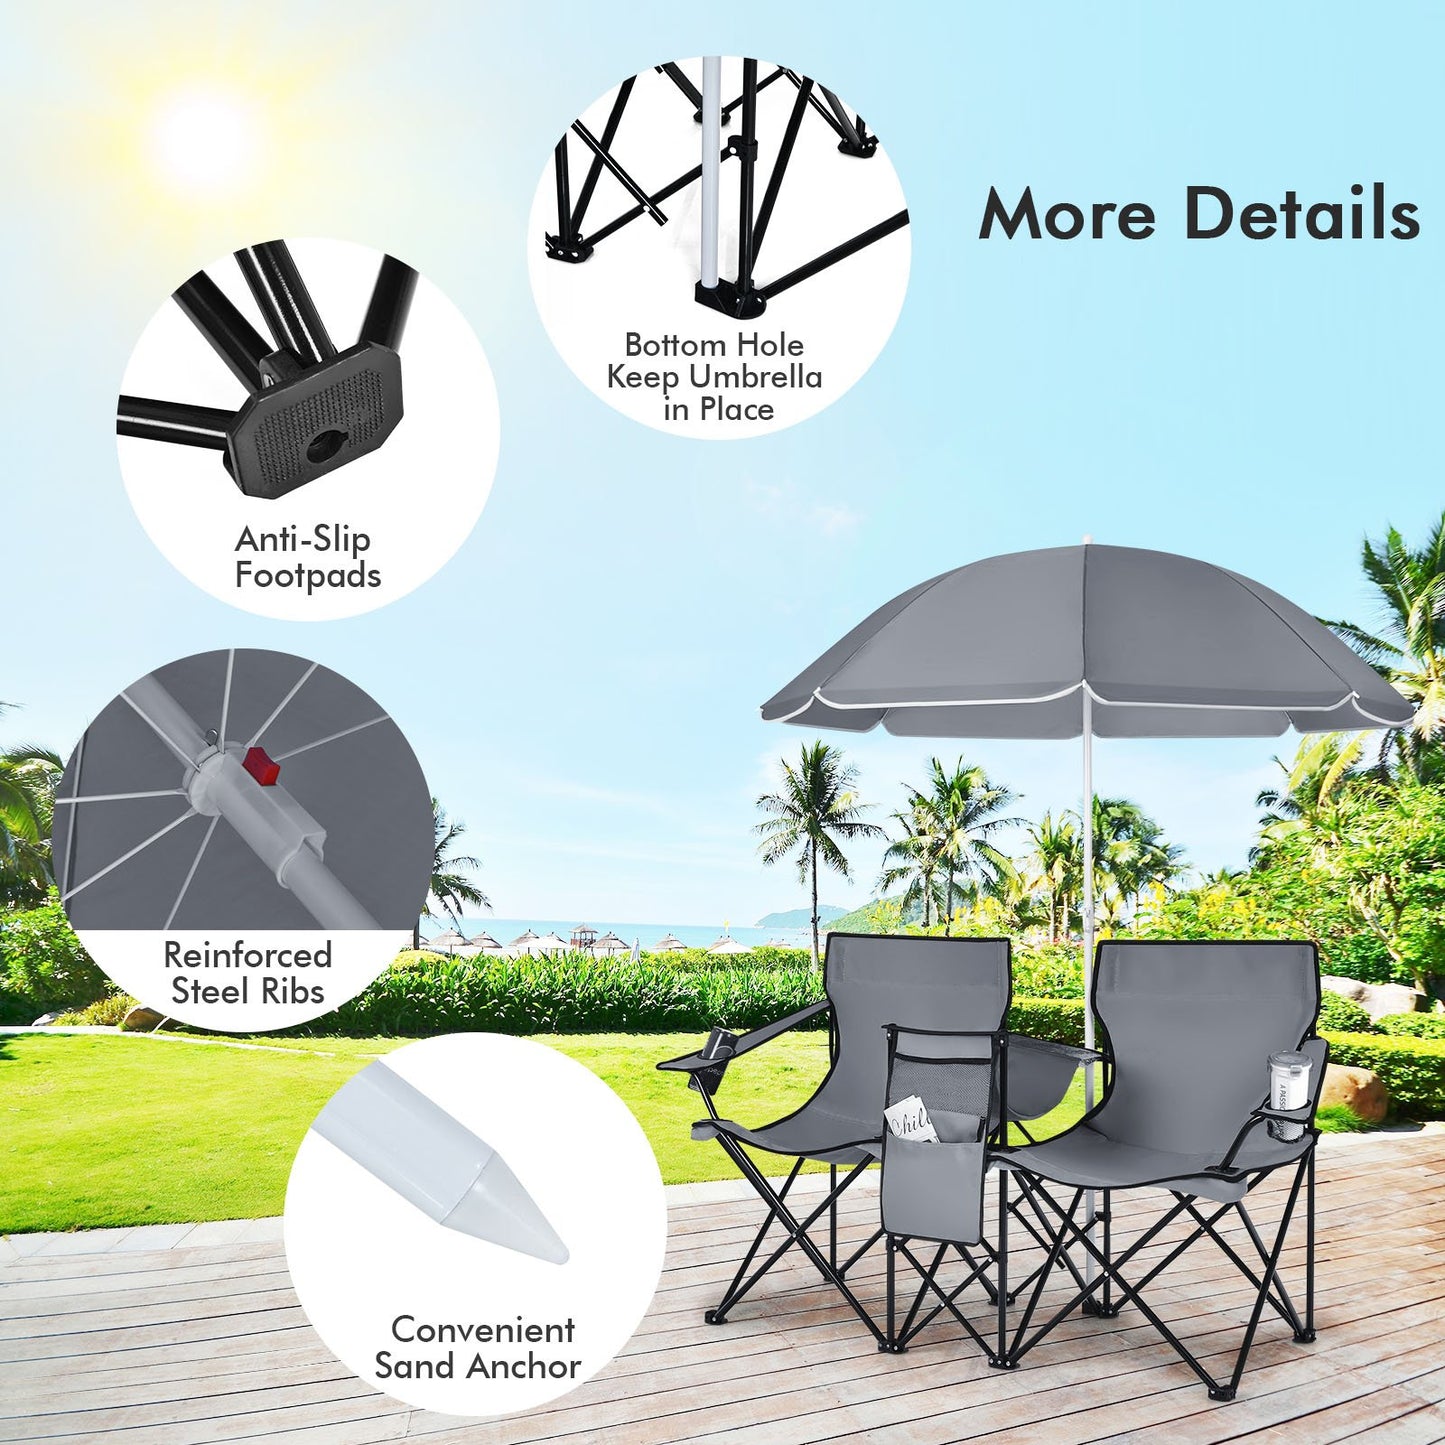 Portable Folding Picnic Double Chair With Umbrella, Gray - Gallery Canada